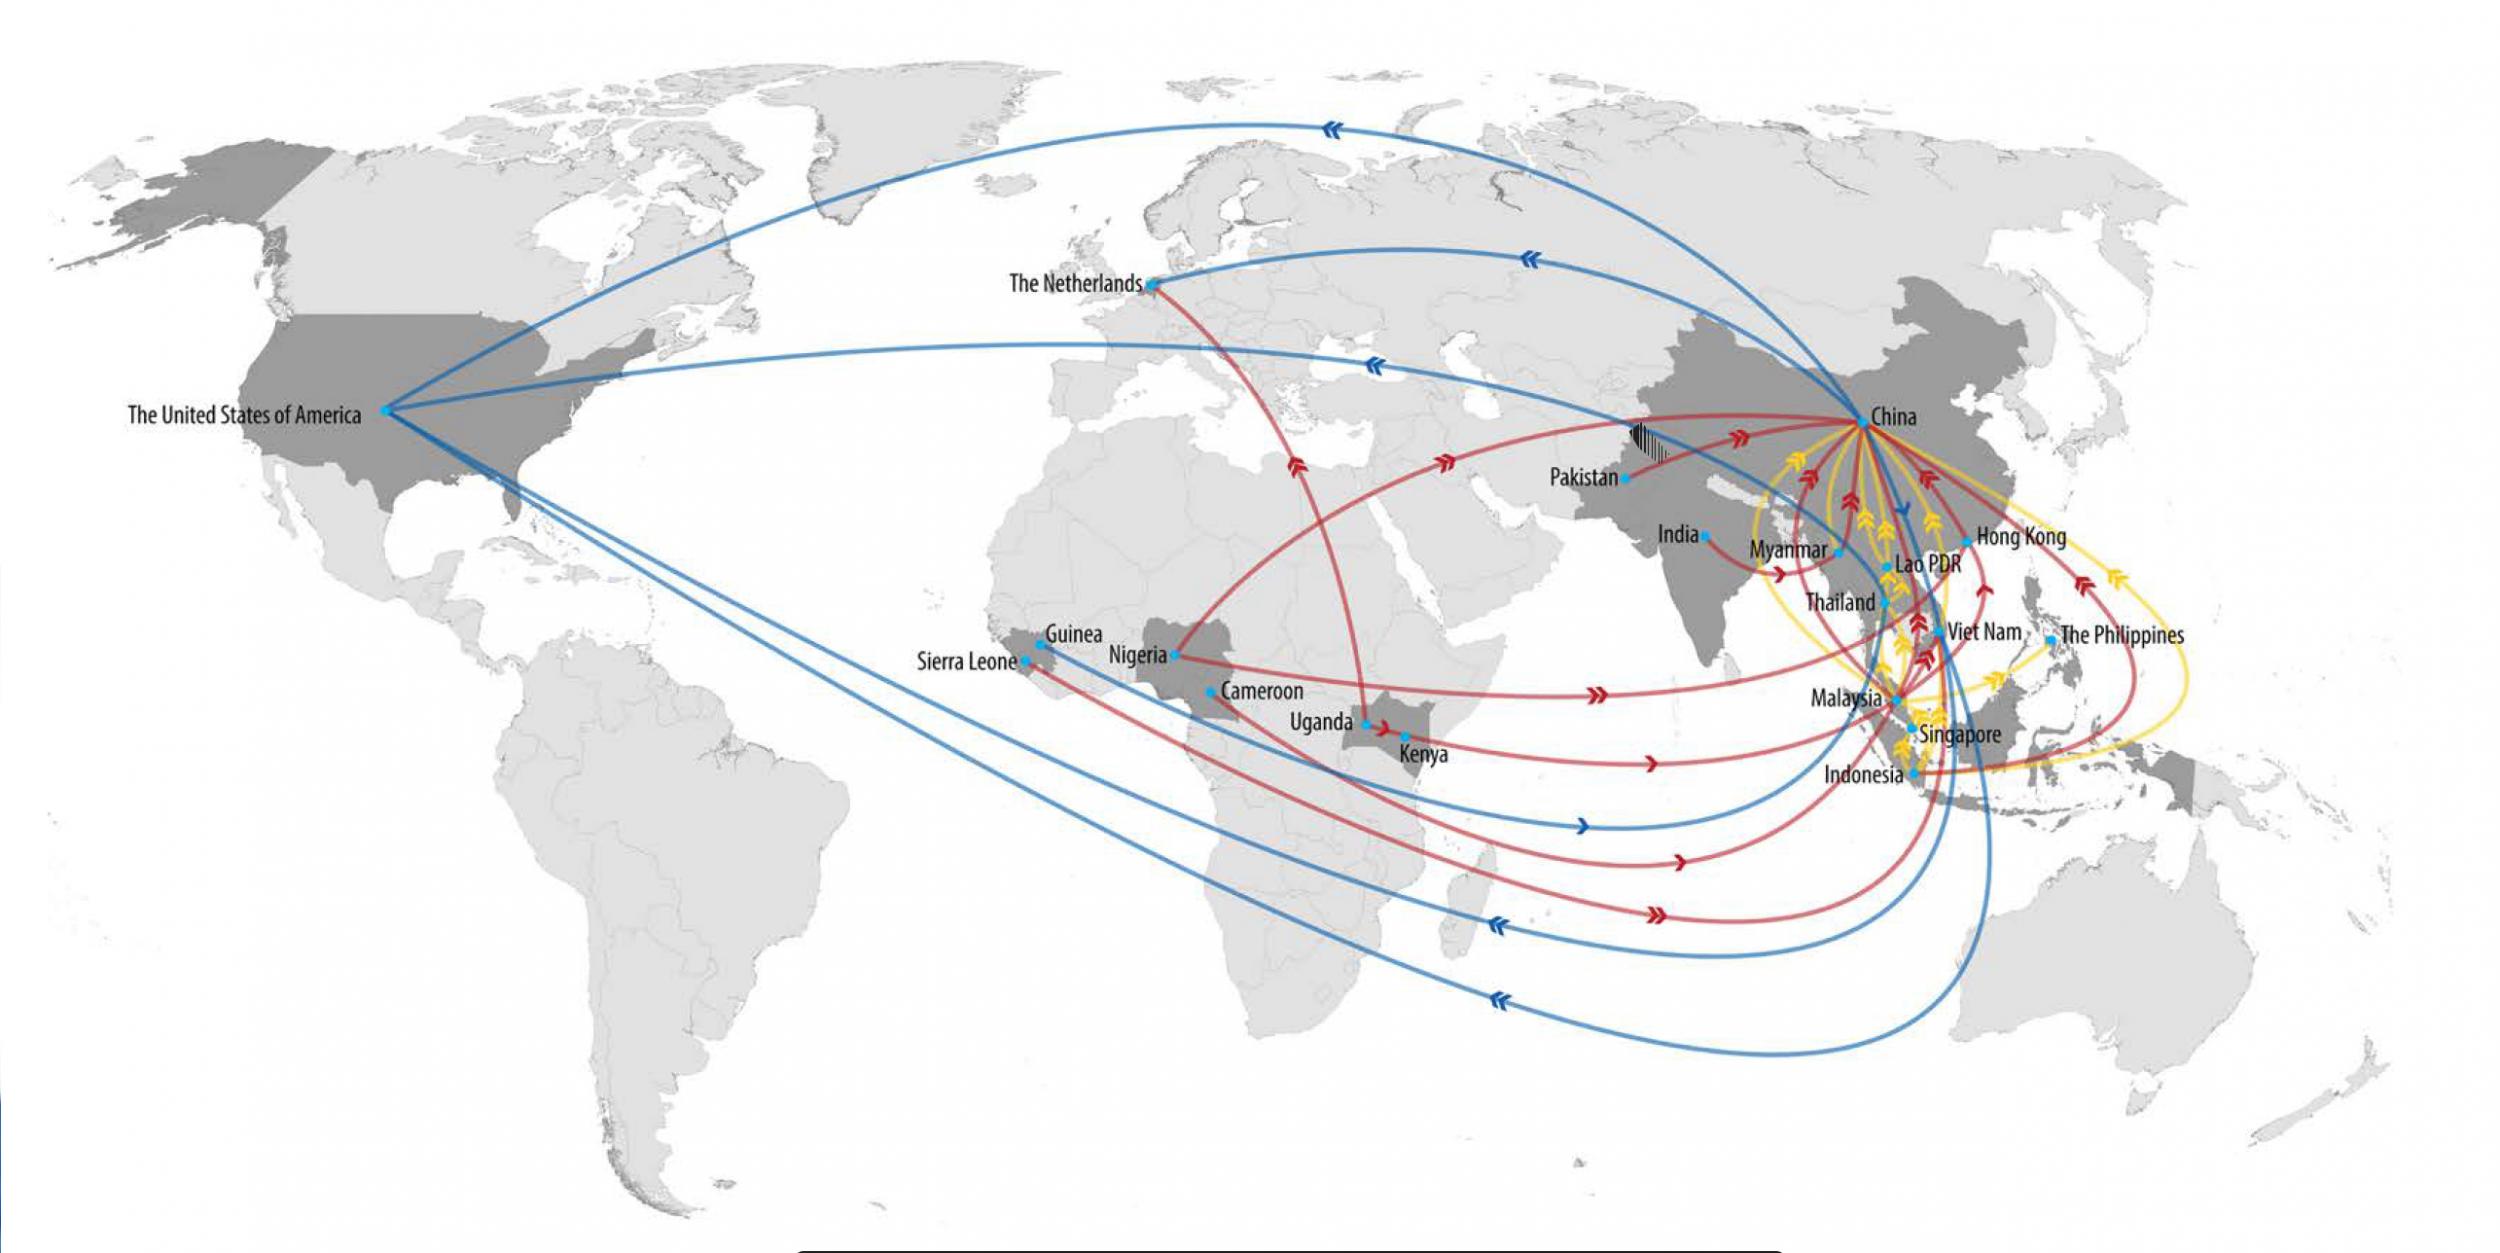 The top trade routes used for large-quantity shipments of pangolins, based on the available data of international incidents with quantitative information. Trade routes for body parts are depicted in blue (sum ≥100 body parts), for scales in red (sum ≥1000 kg), for whole animals in yellow (sum ≥500 animals). Large-quantity shipments are weighted equally (using the same line thickness) across the three different commodities. Single arrow heads (&gt;) indicate a transit edge in a trade route, and double arrow heads (&gt;&gt;) indicate the last edge in the trade route. (Copyright: Traffic)